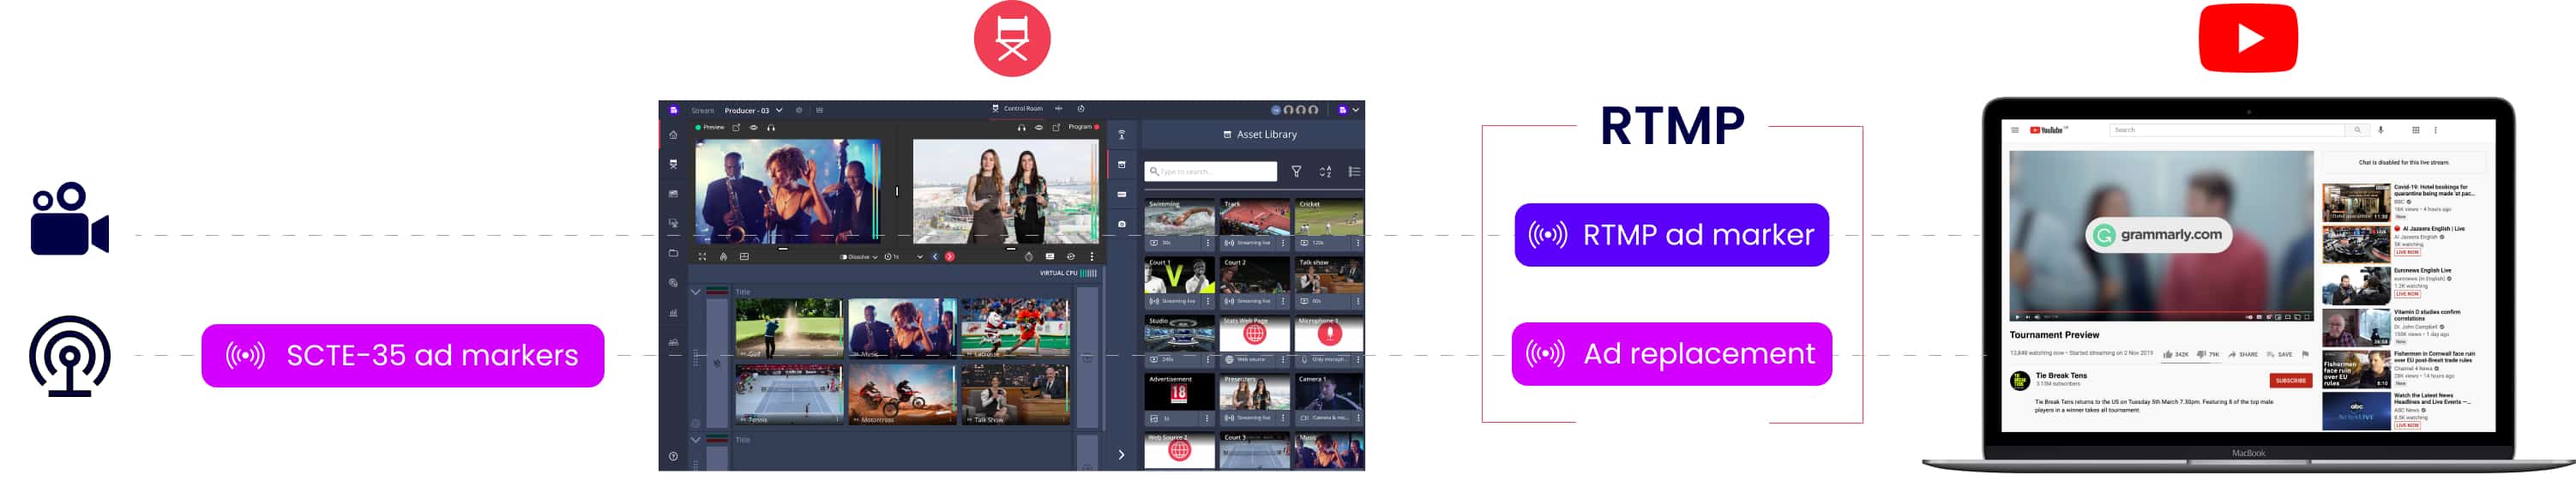 an image of the workflow used to generate revenue from video content using YouTube RTMP live ad markers in Grabyo